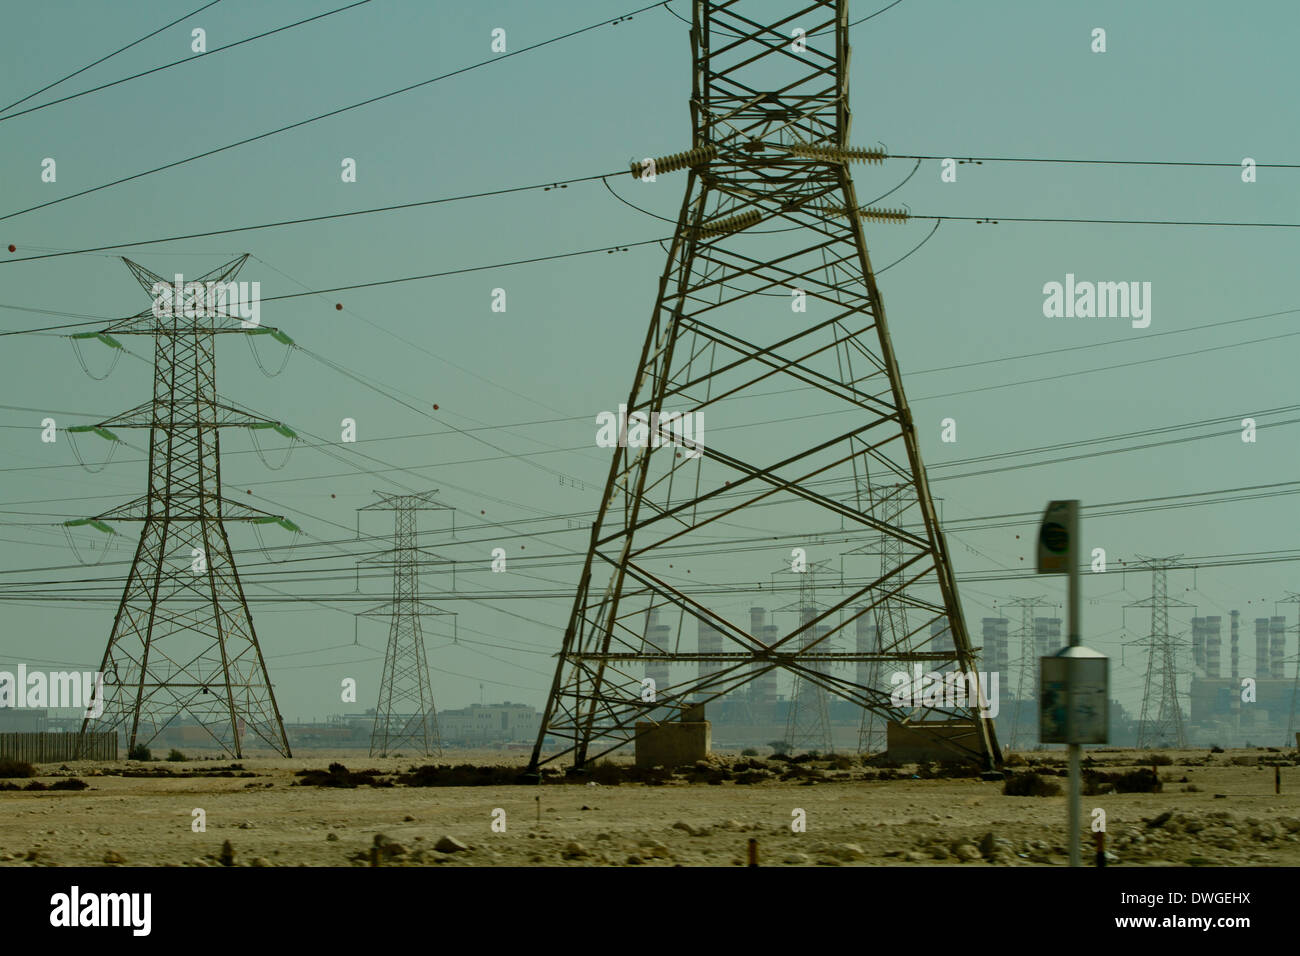 Electricity Pylons in desert Qatar Middle East Stock Photo